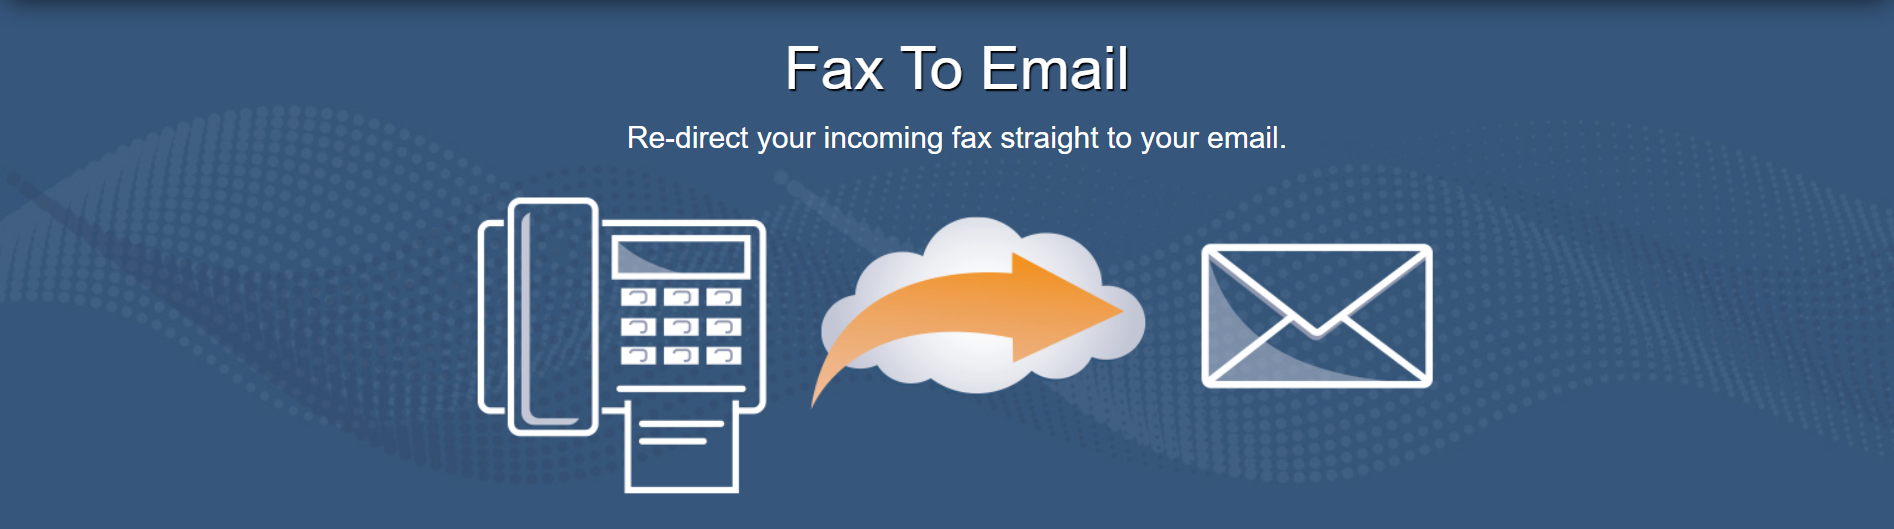 fax to email